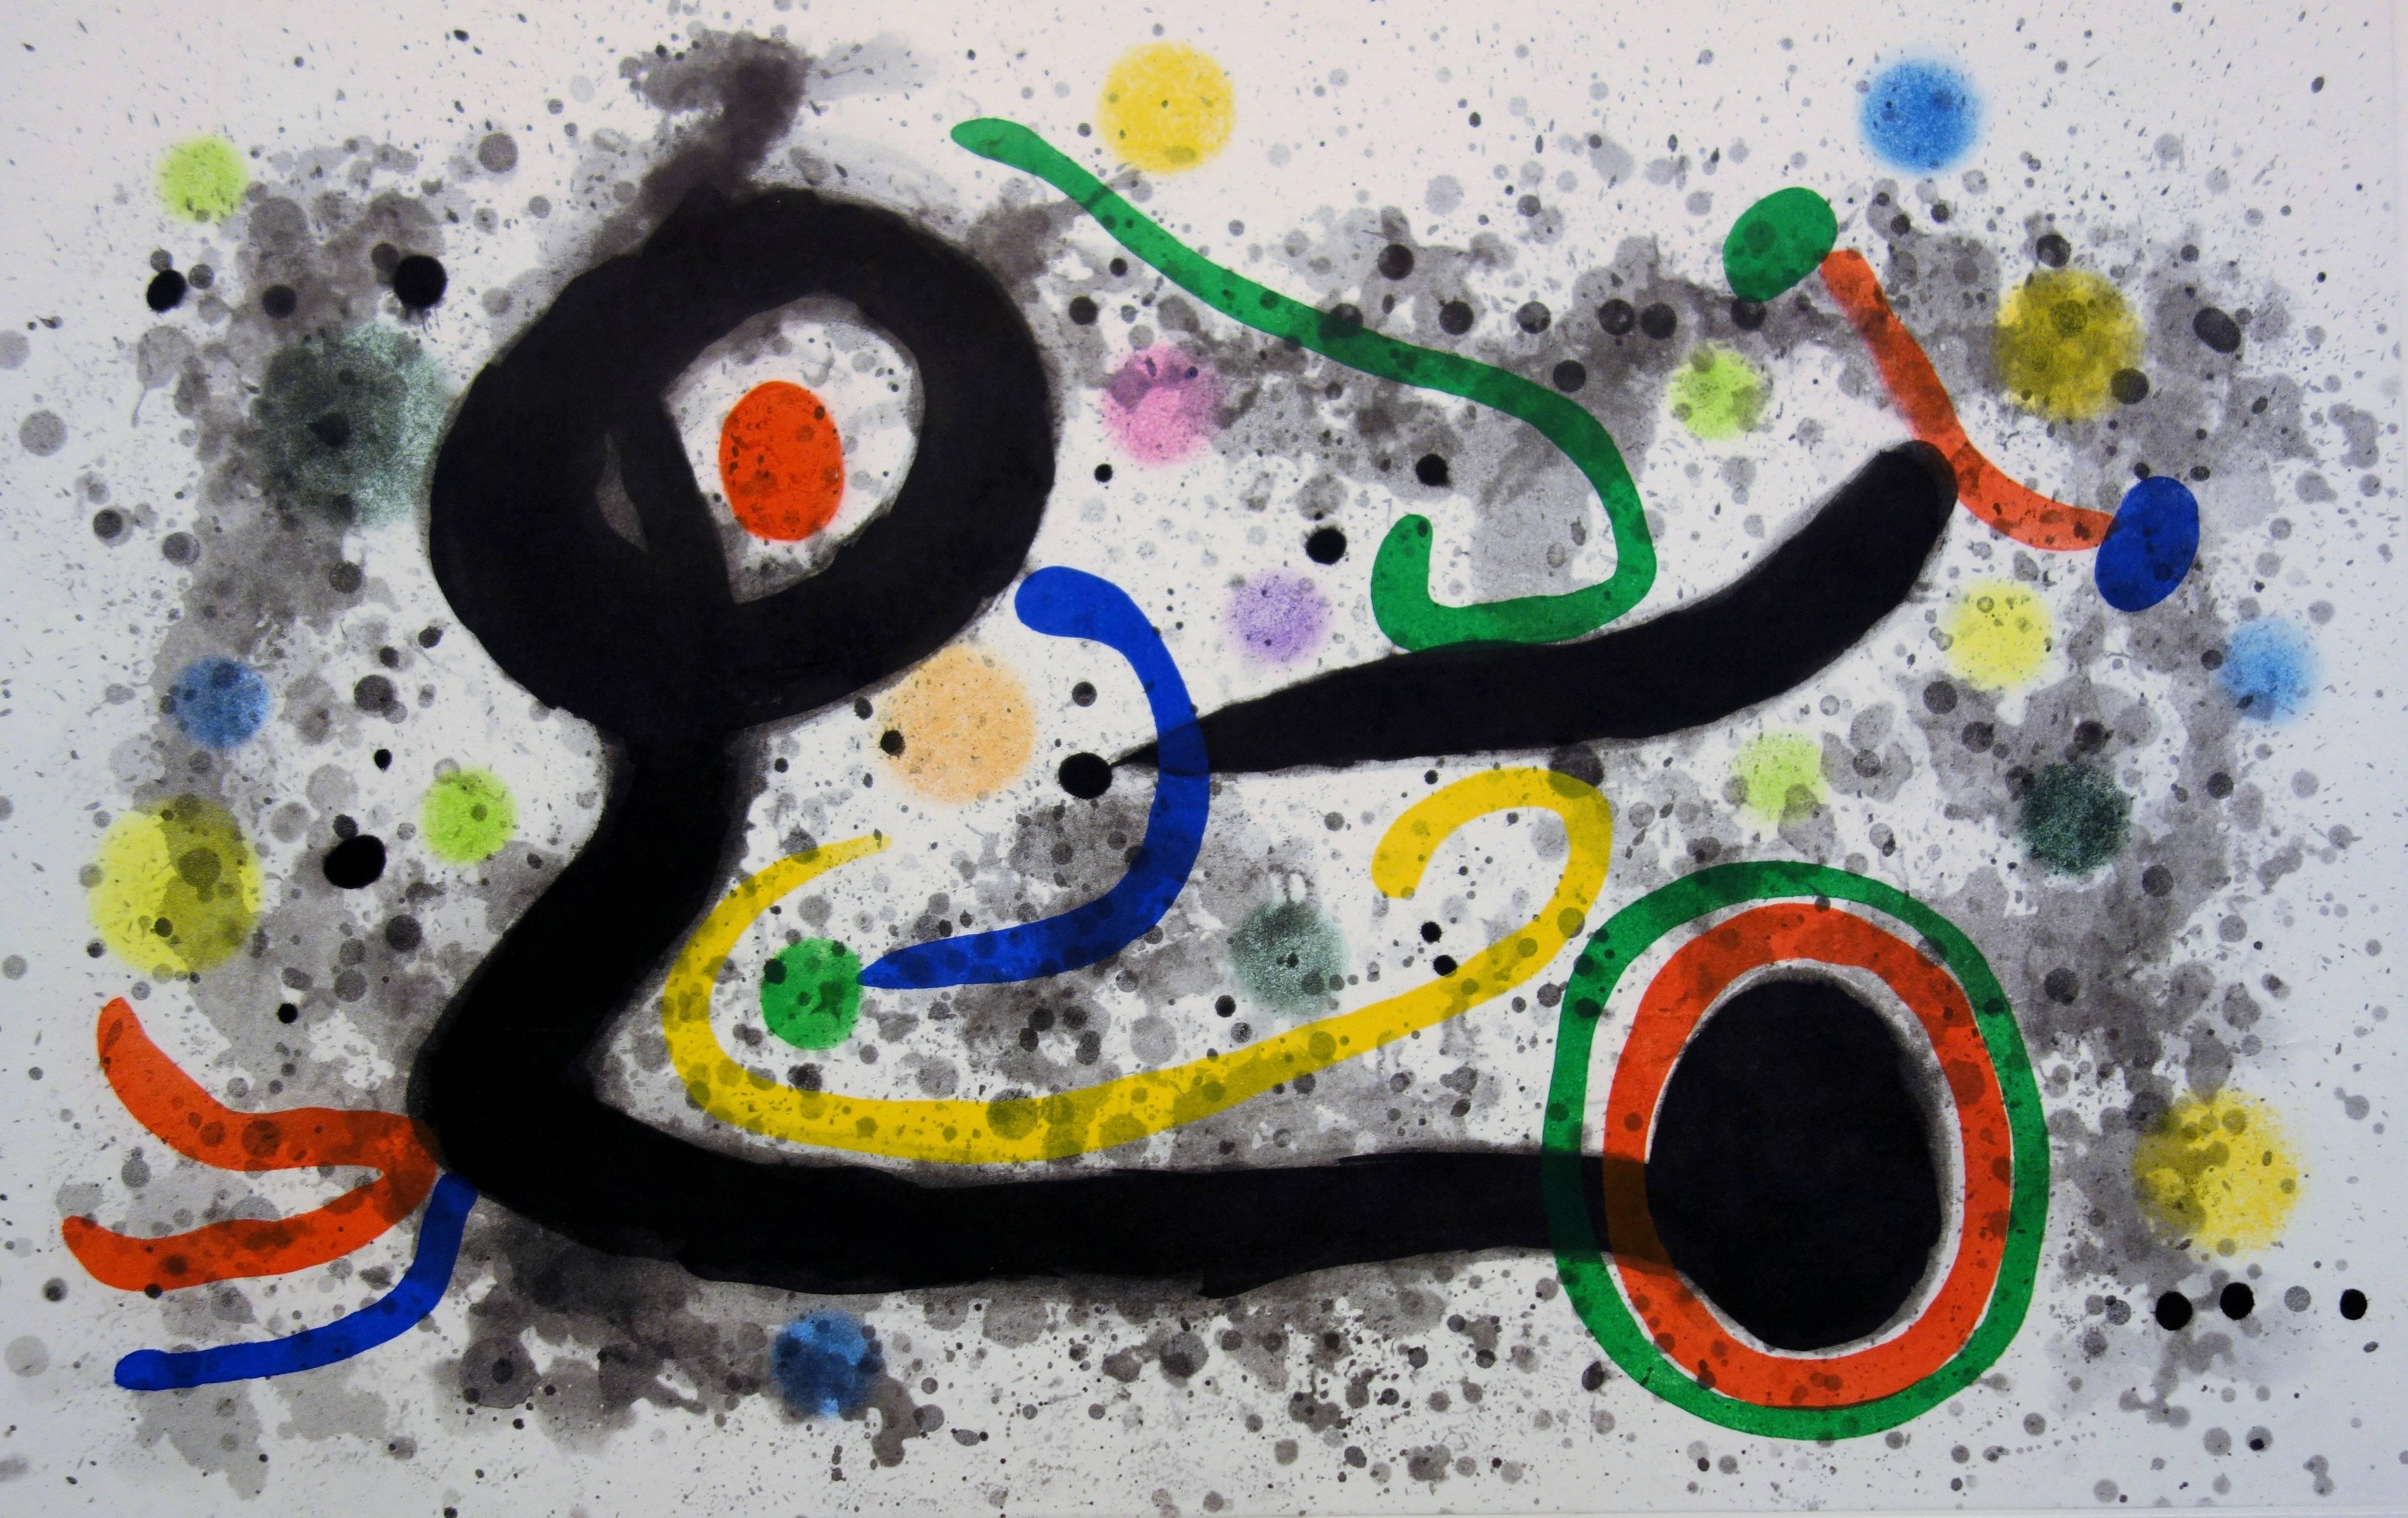 Sous la Grele (Under the Storm) - Original handsigned etching and aquatint, 1969 - Gray Abstract Print by Joan Miró